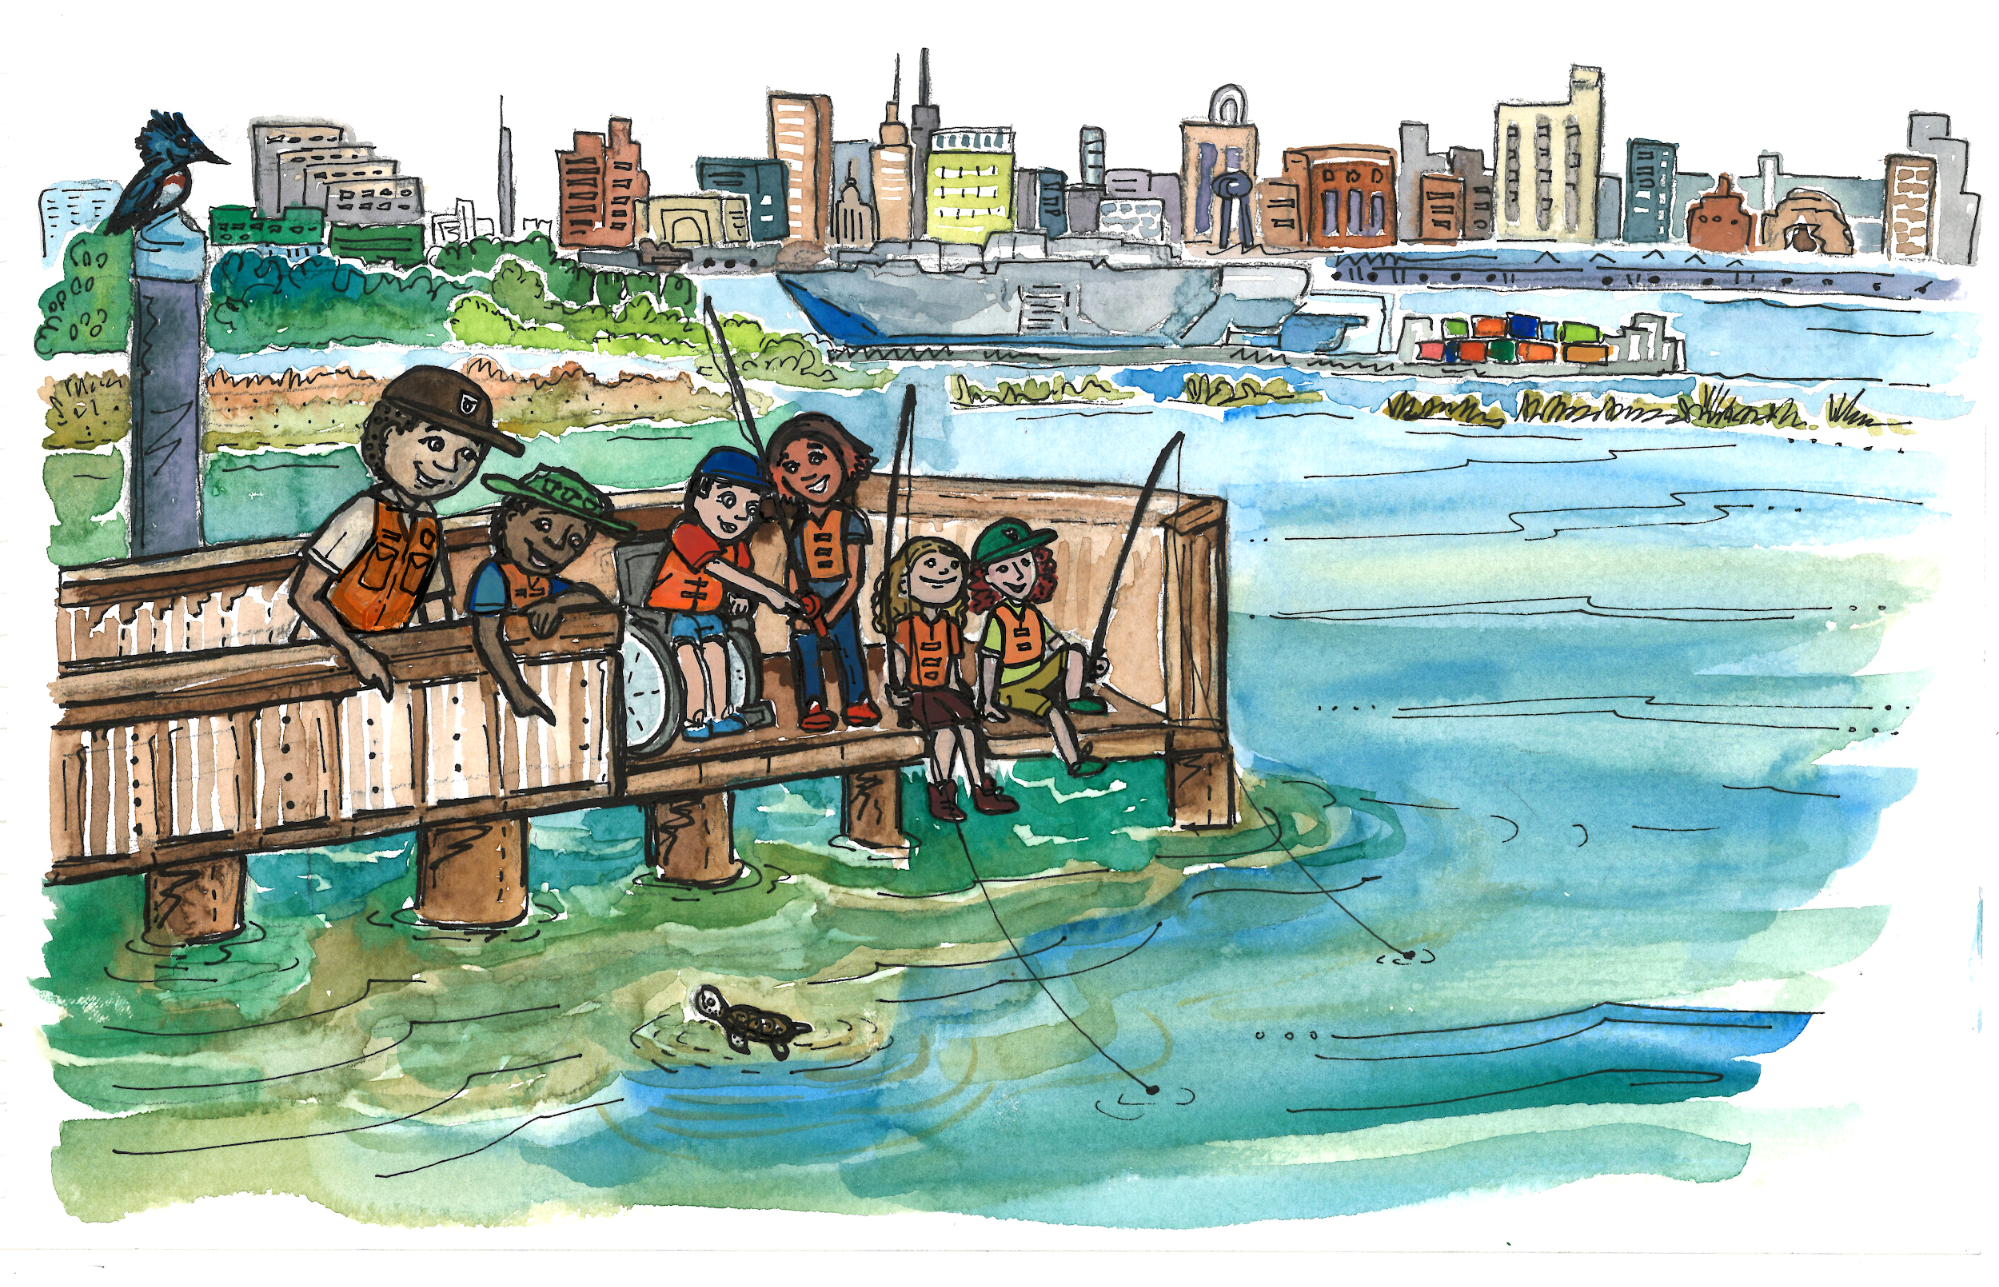 Children fishing from a pier with a ranger standing by. City in the background.